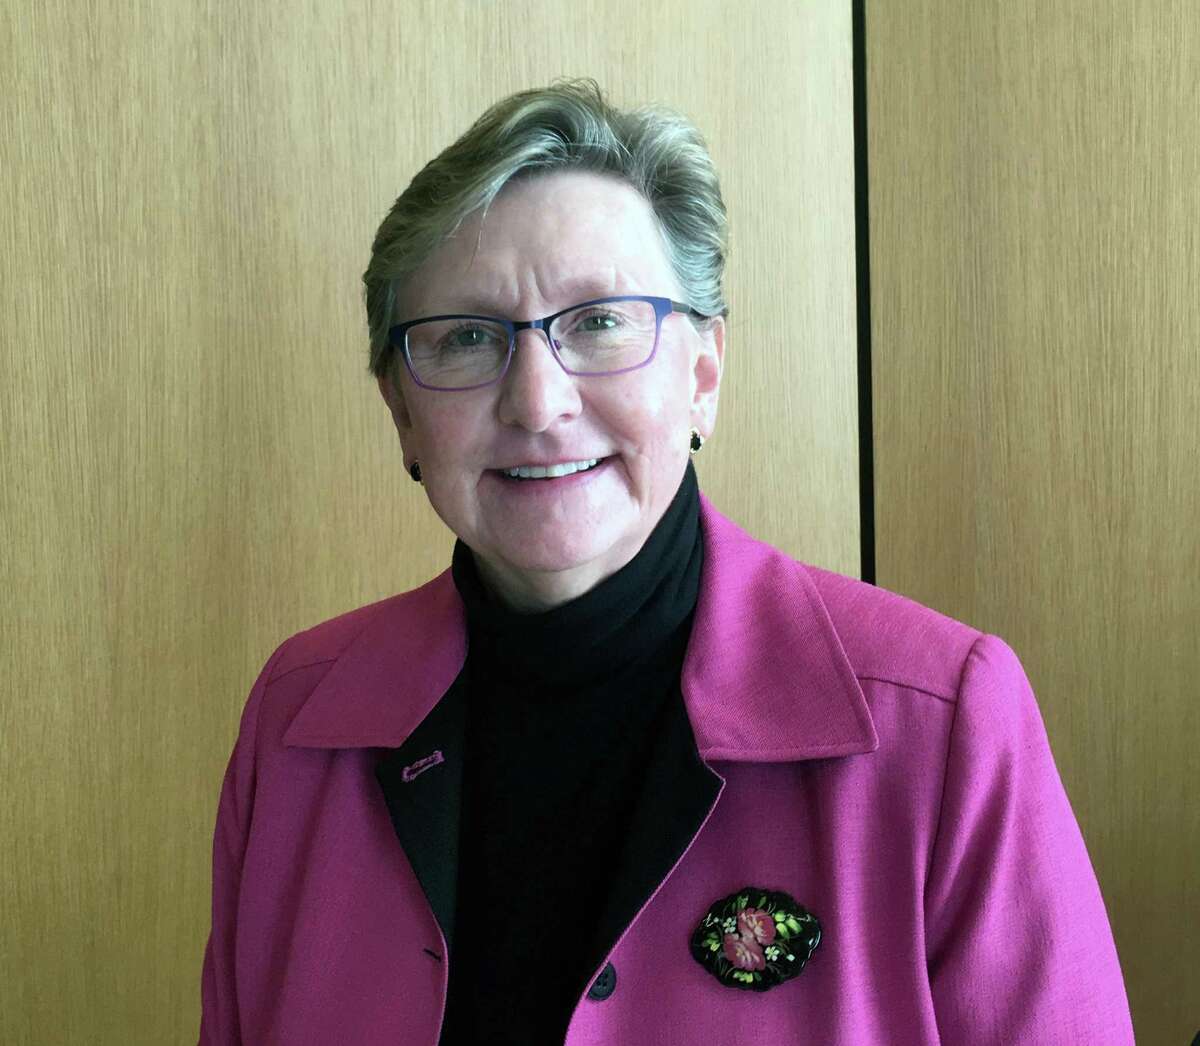 Sandra Dennies was appointed as New Canaan’s interim Chief Financial Officer by the Board of Selectmen on May 2.